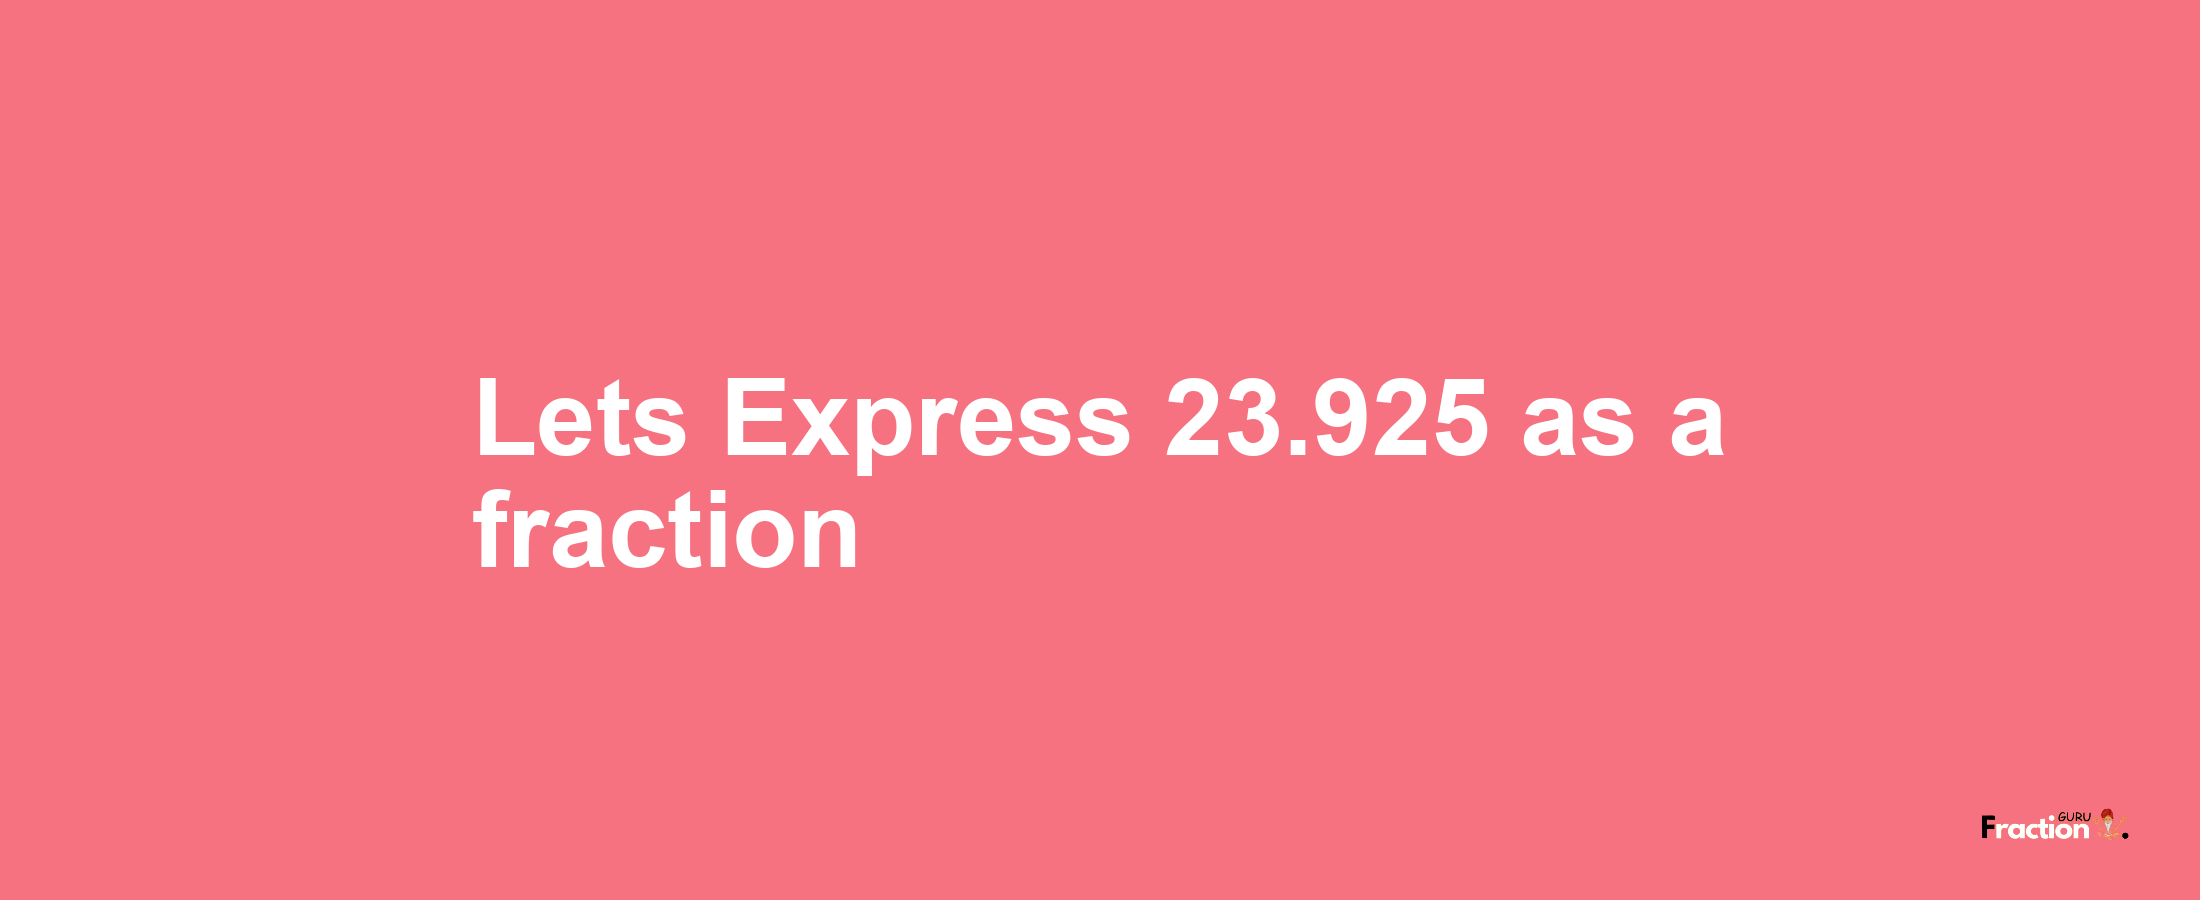 Lets Express 23.925 as afraction